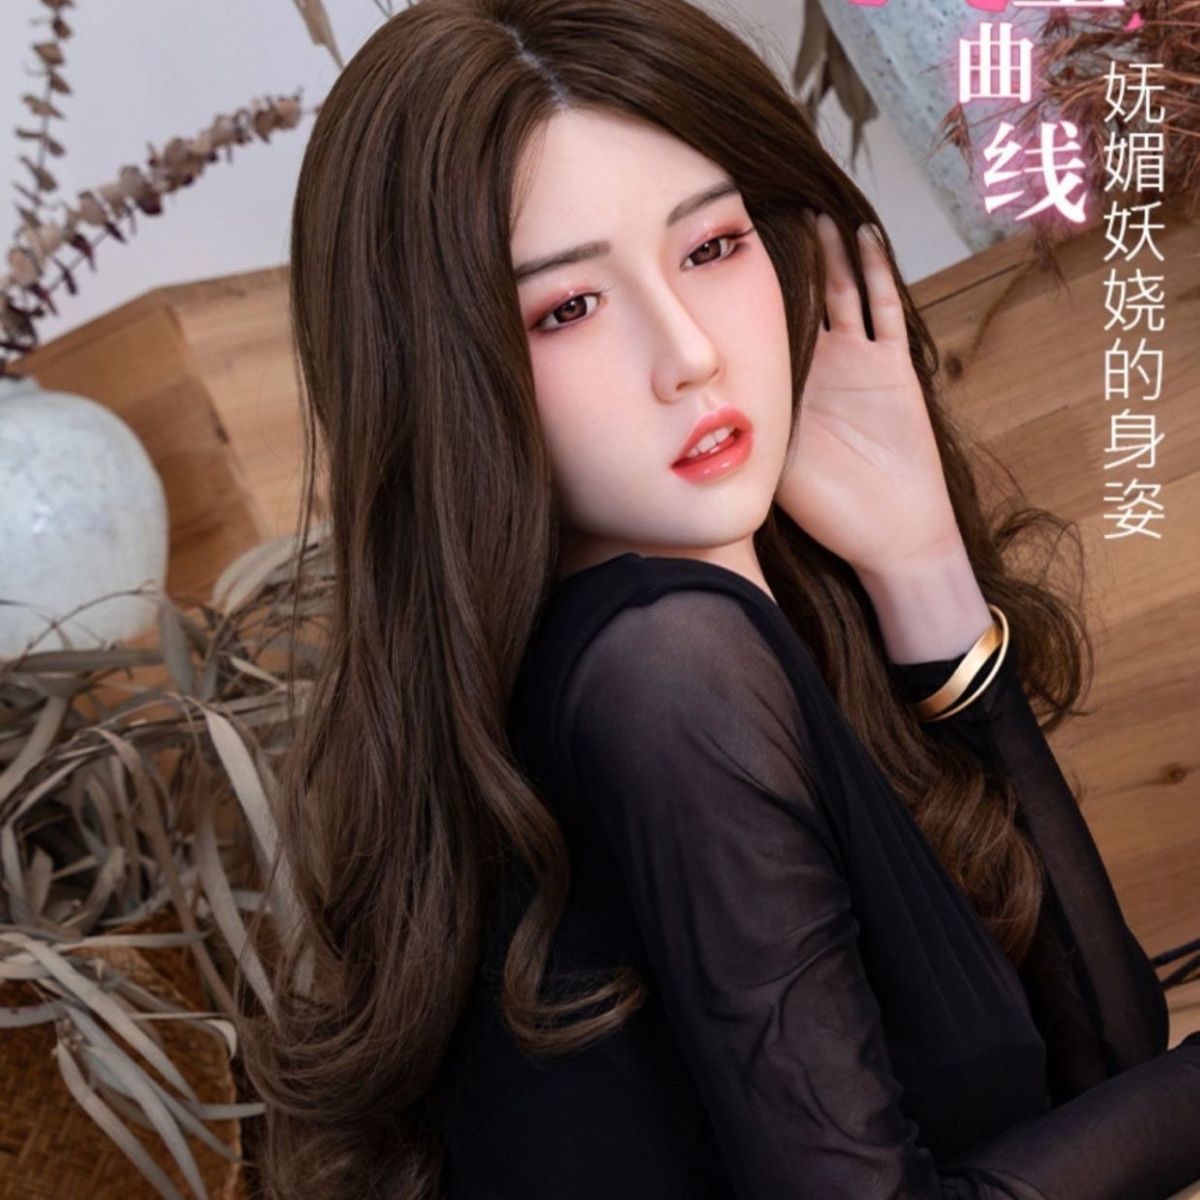 Physical doll full body silicone human version with skeleton non-inflatable female baby adult products